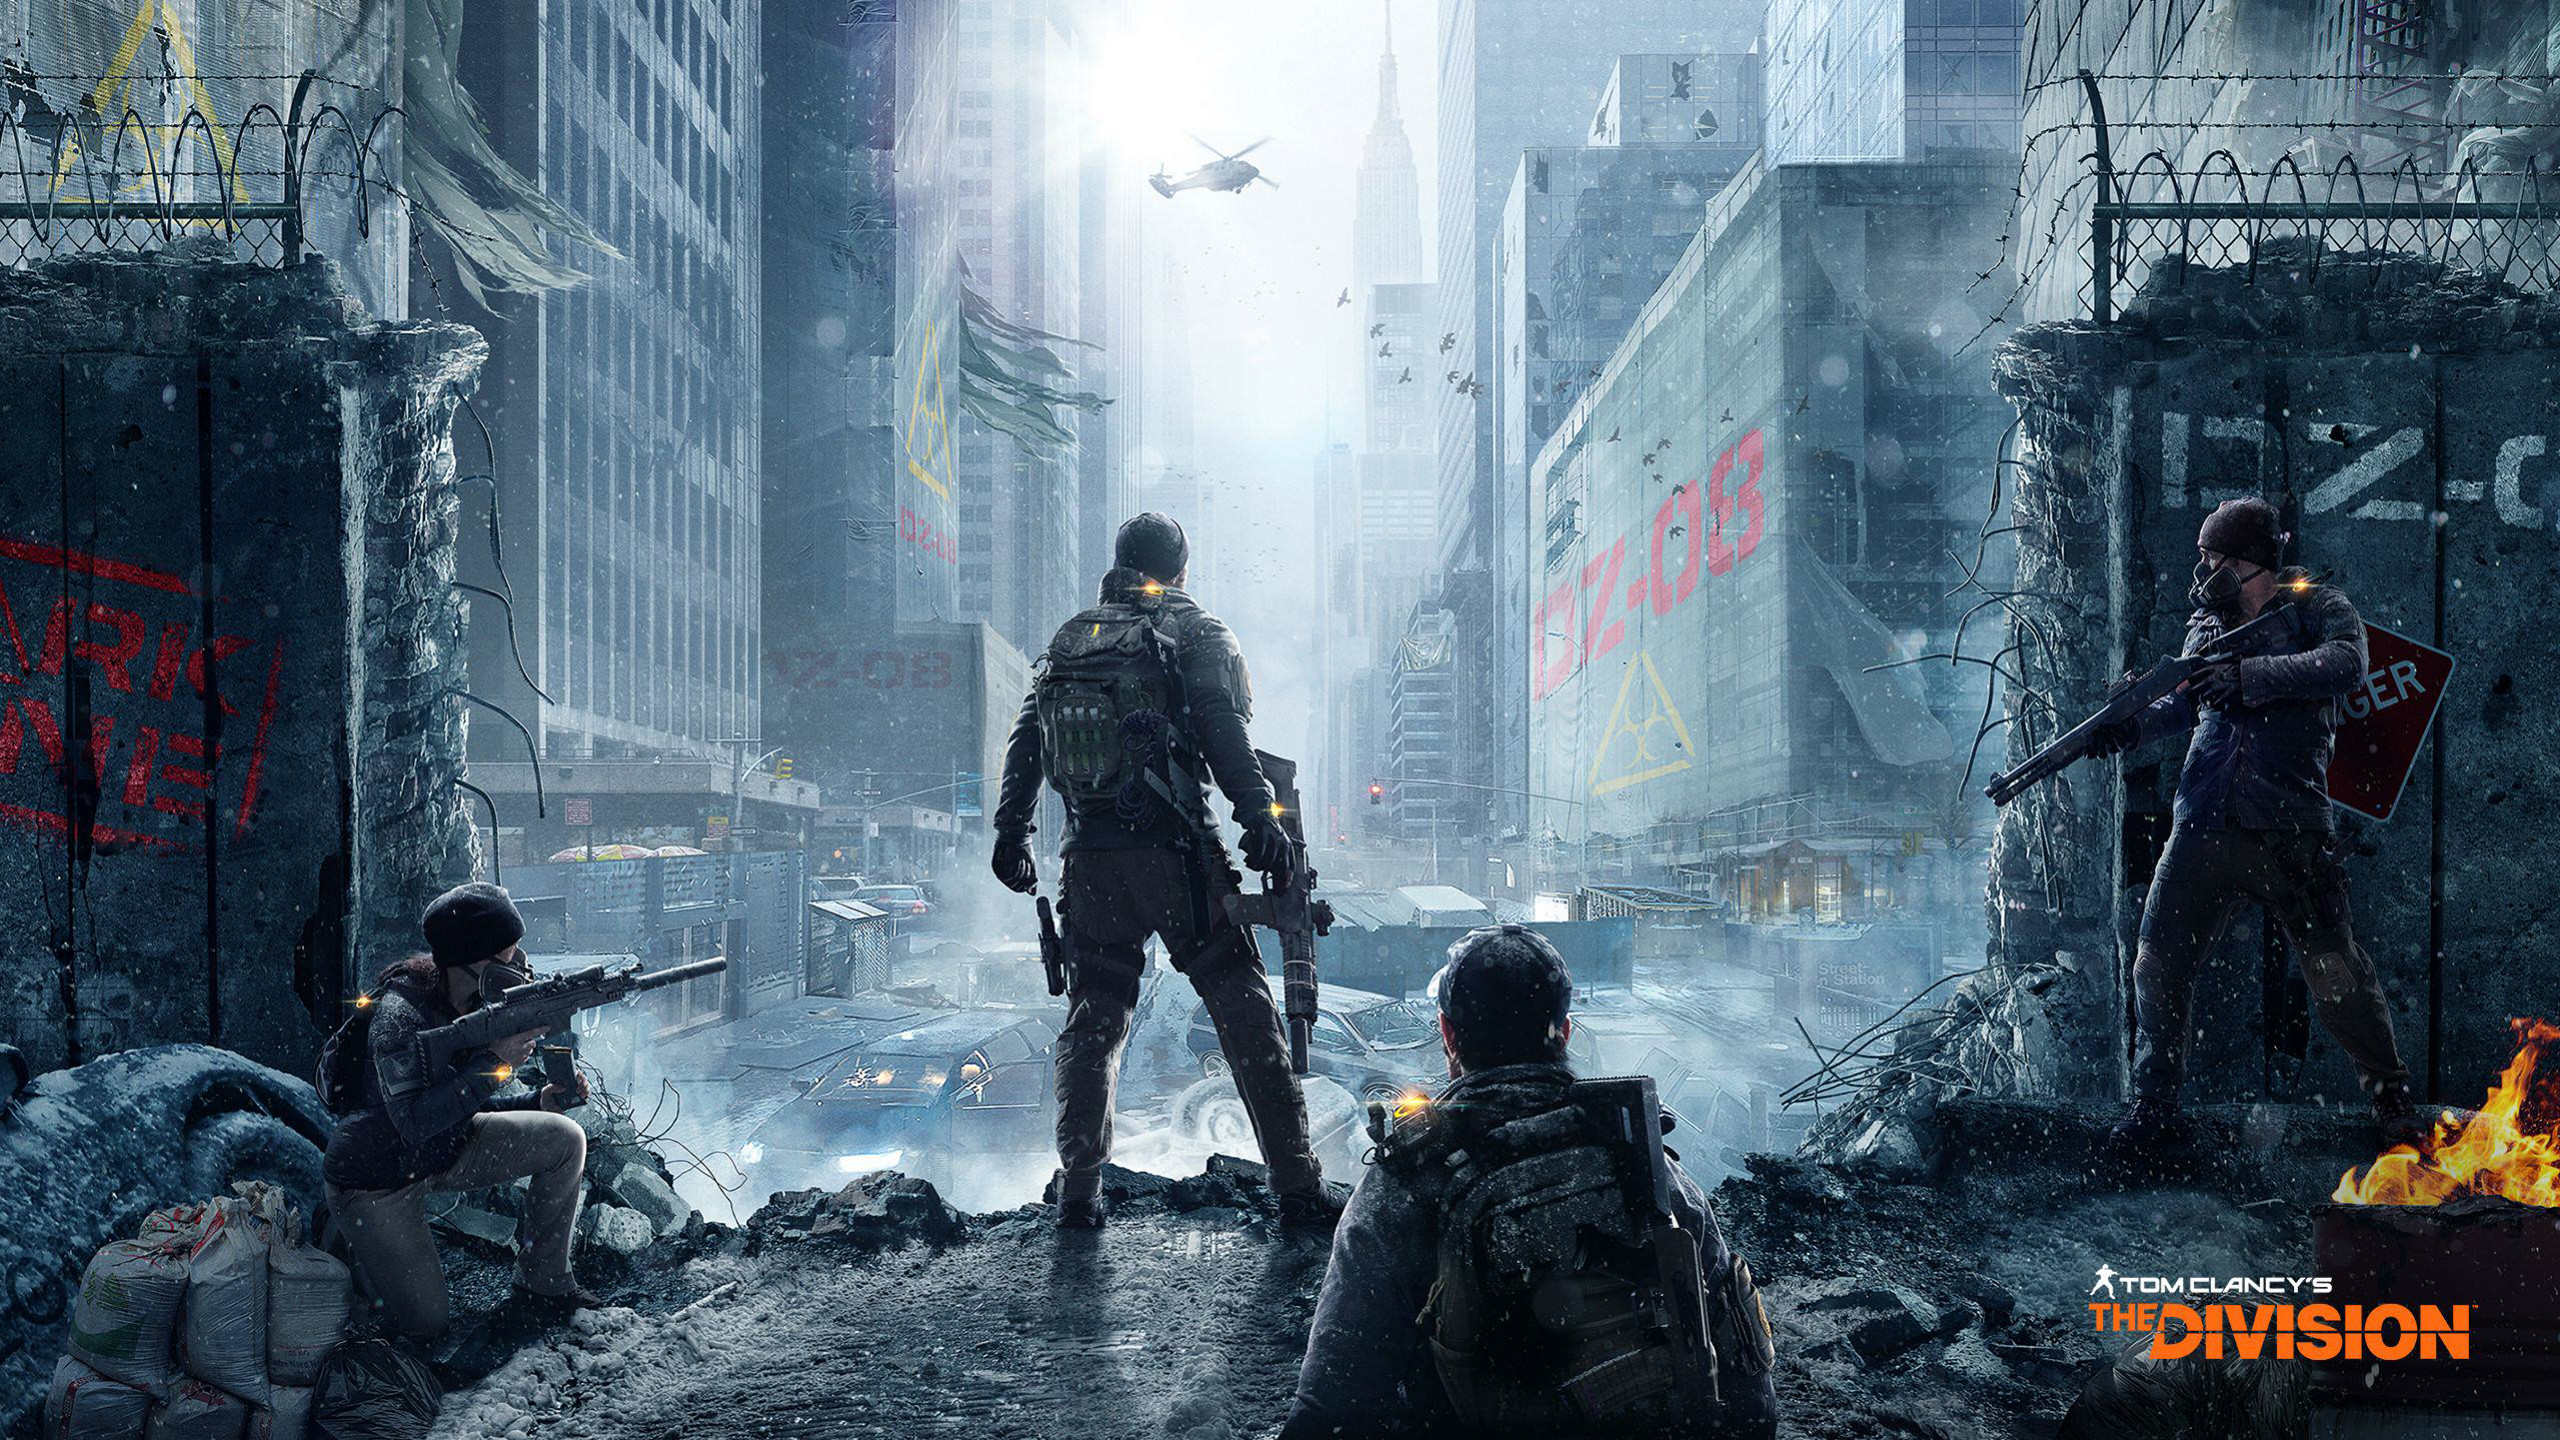 The Division Wallpaper Image